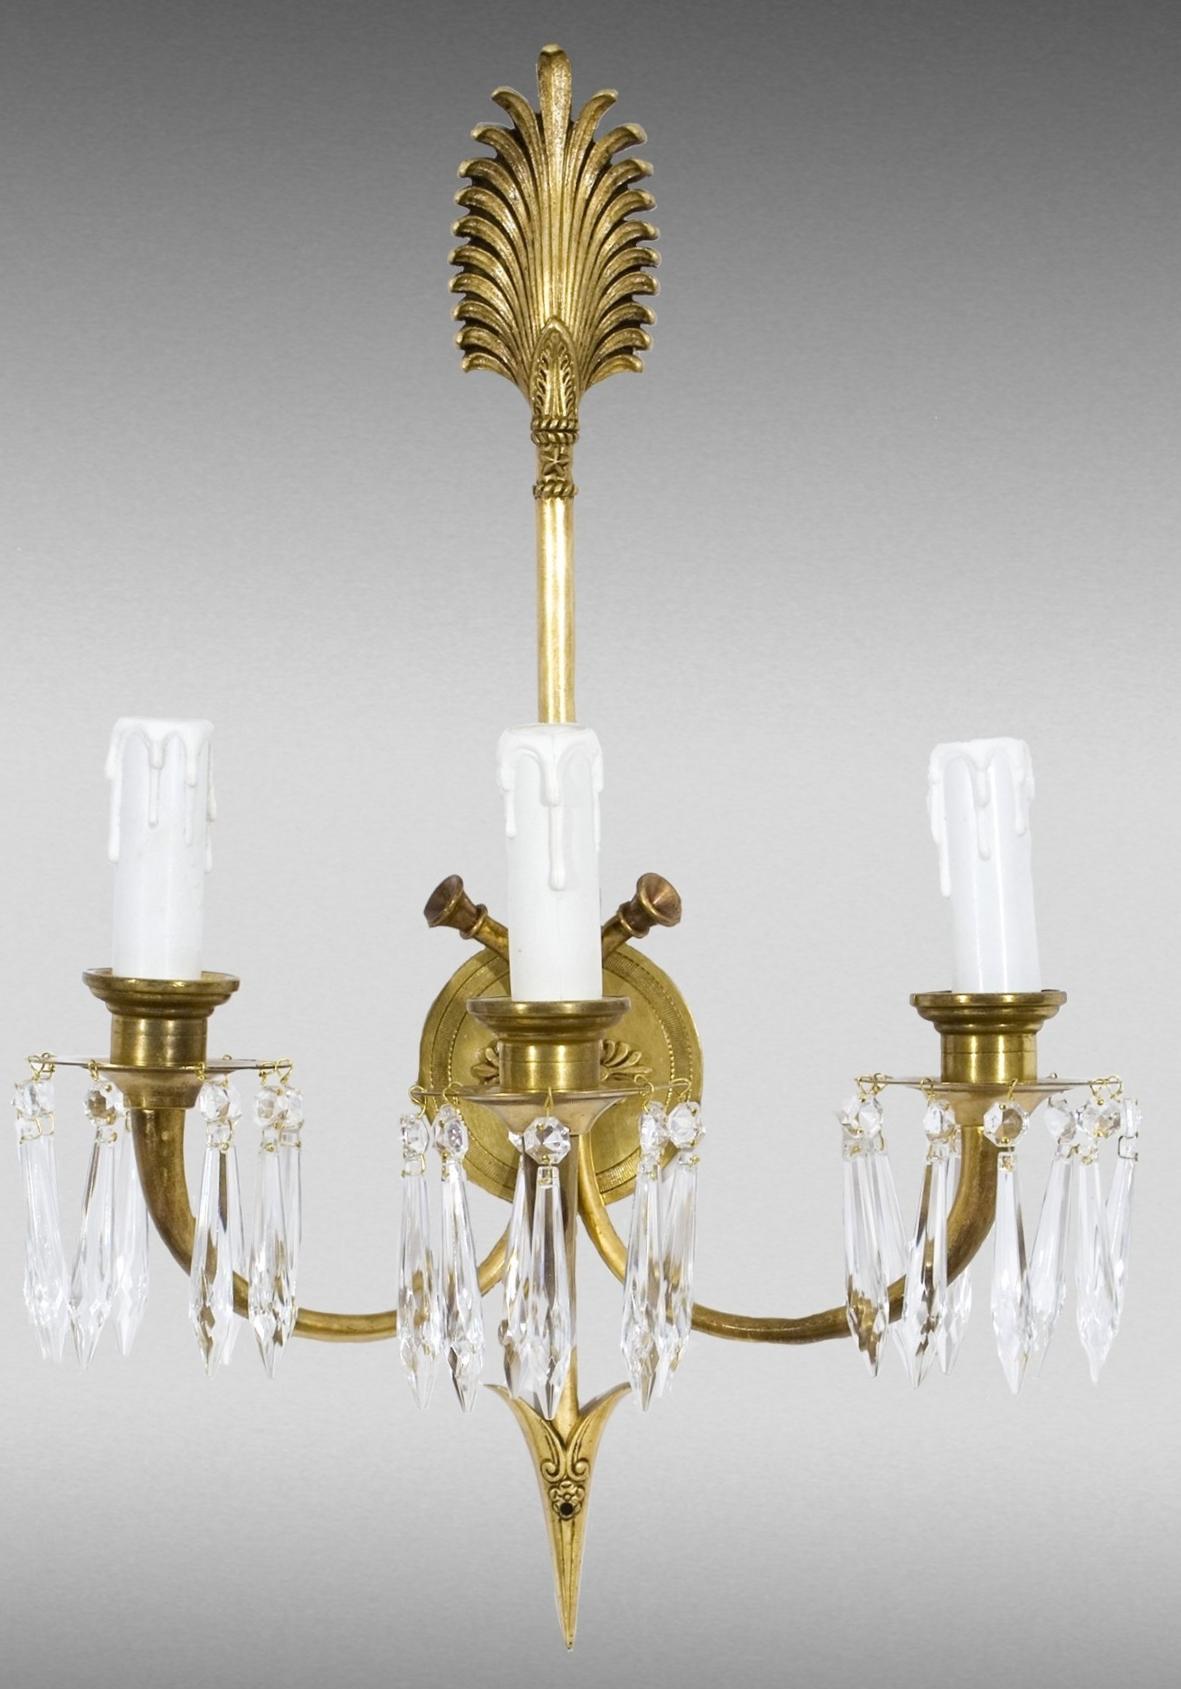 Pair of appliques. Bronze, glass. Empire style, France, circa 1900.
 Both are practically the same, each wall light has three points of light and a decoration and lines that respond to the classicist influence of the style to which they belong.